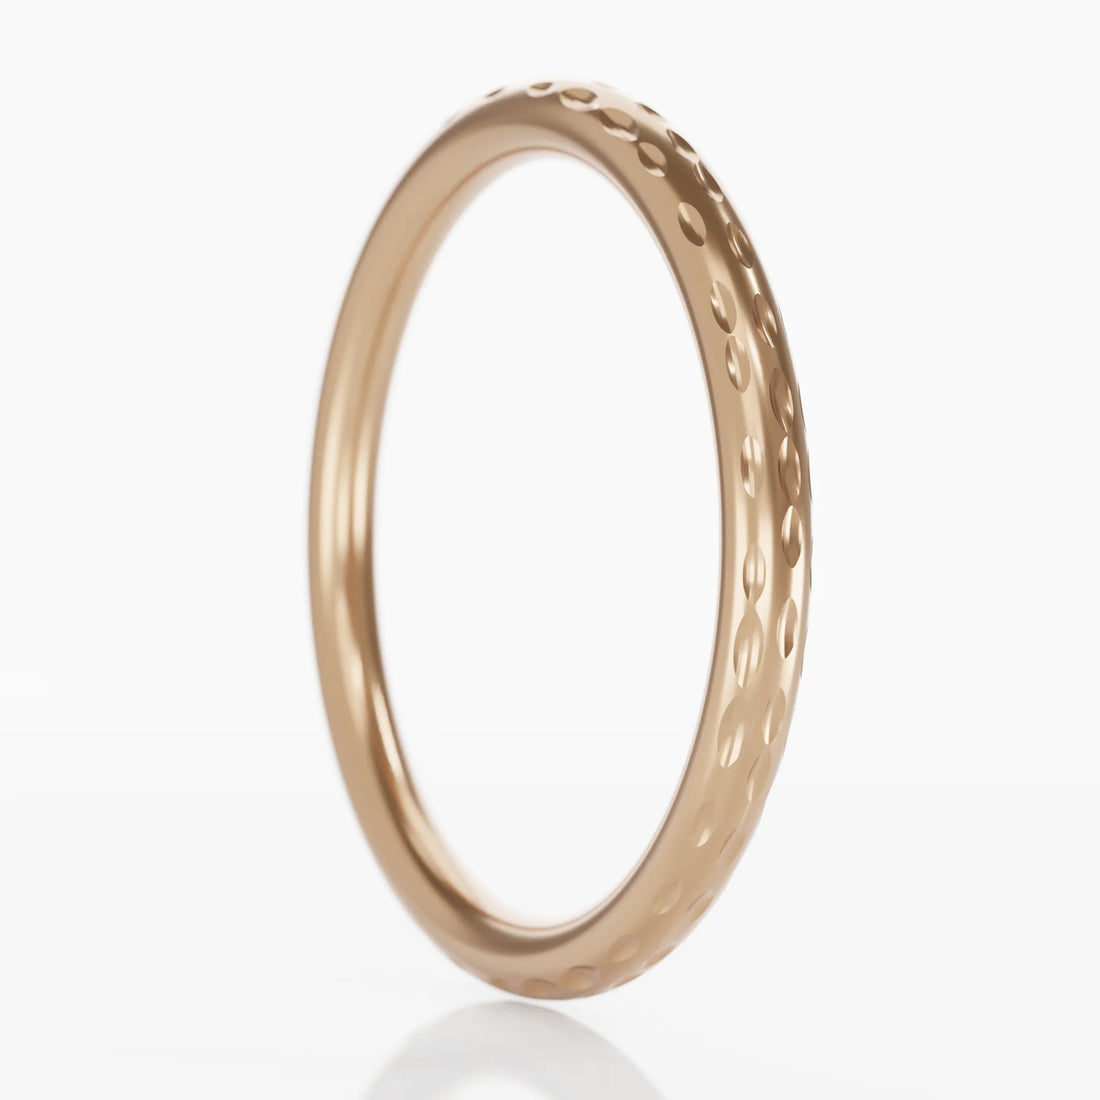 Golden Rings: A Timeless Gift for Anniversaries and Milestones